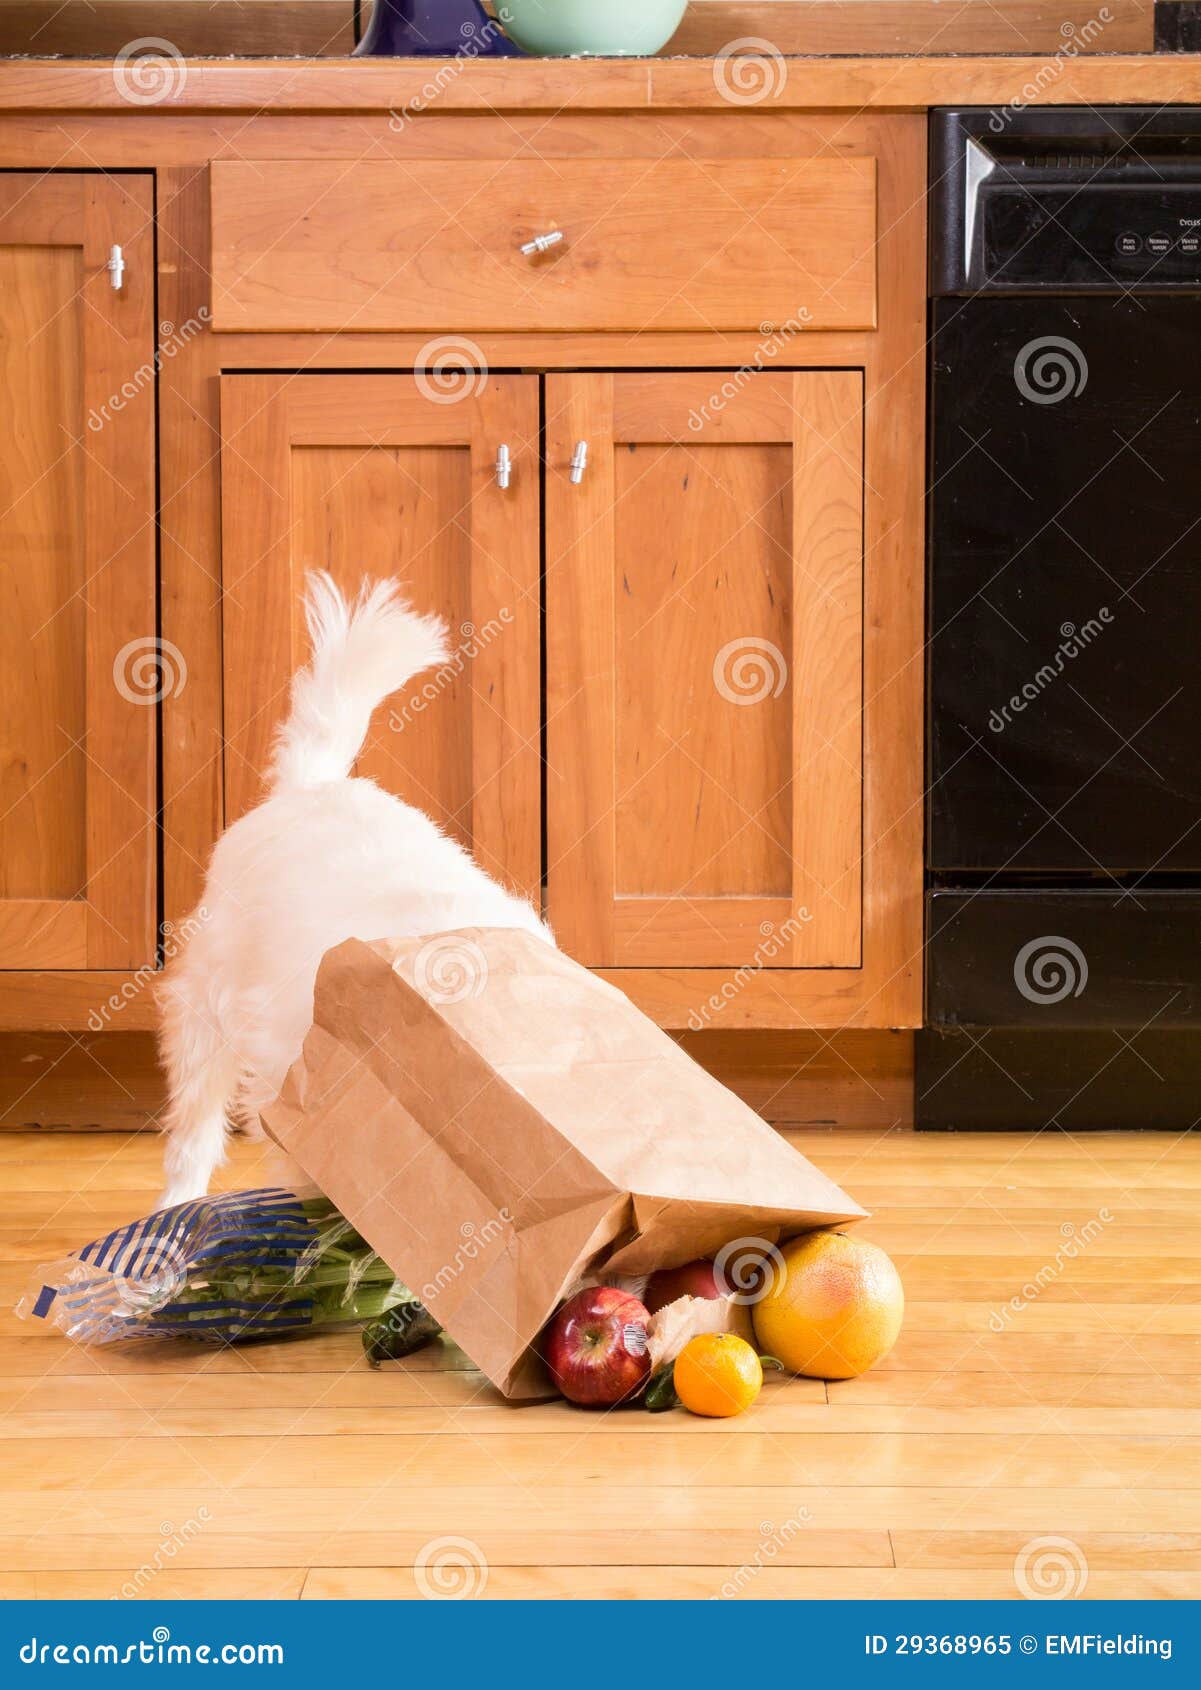 Dog Getting Into The Groceries Stock Image - Image of kitchen ...